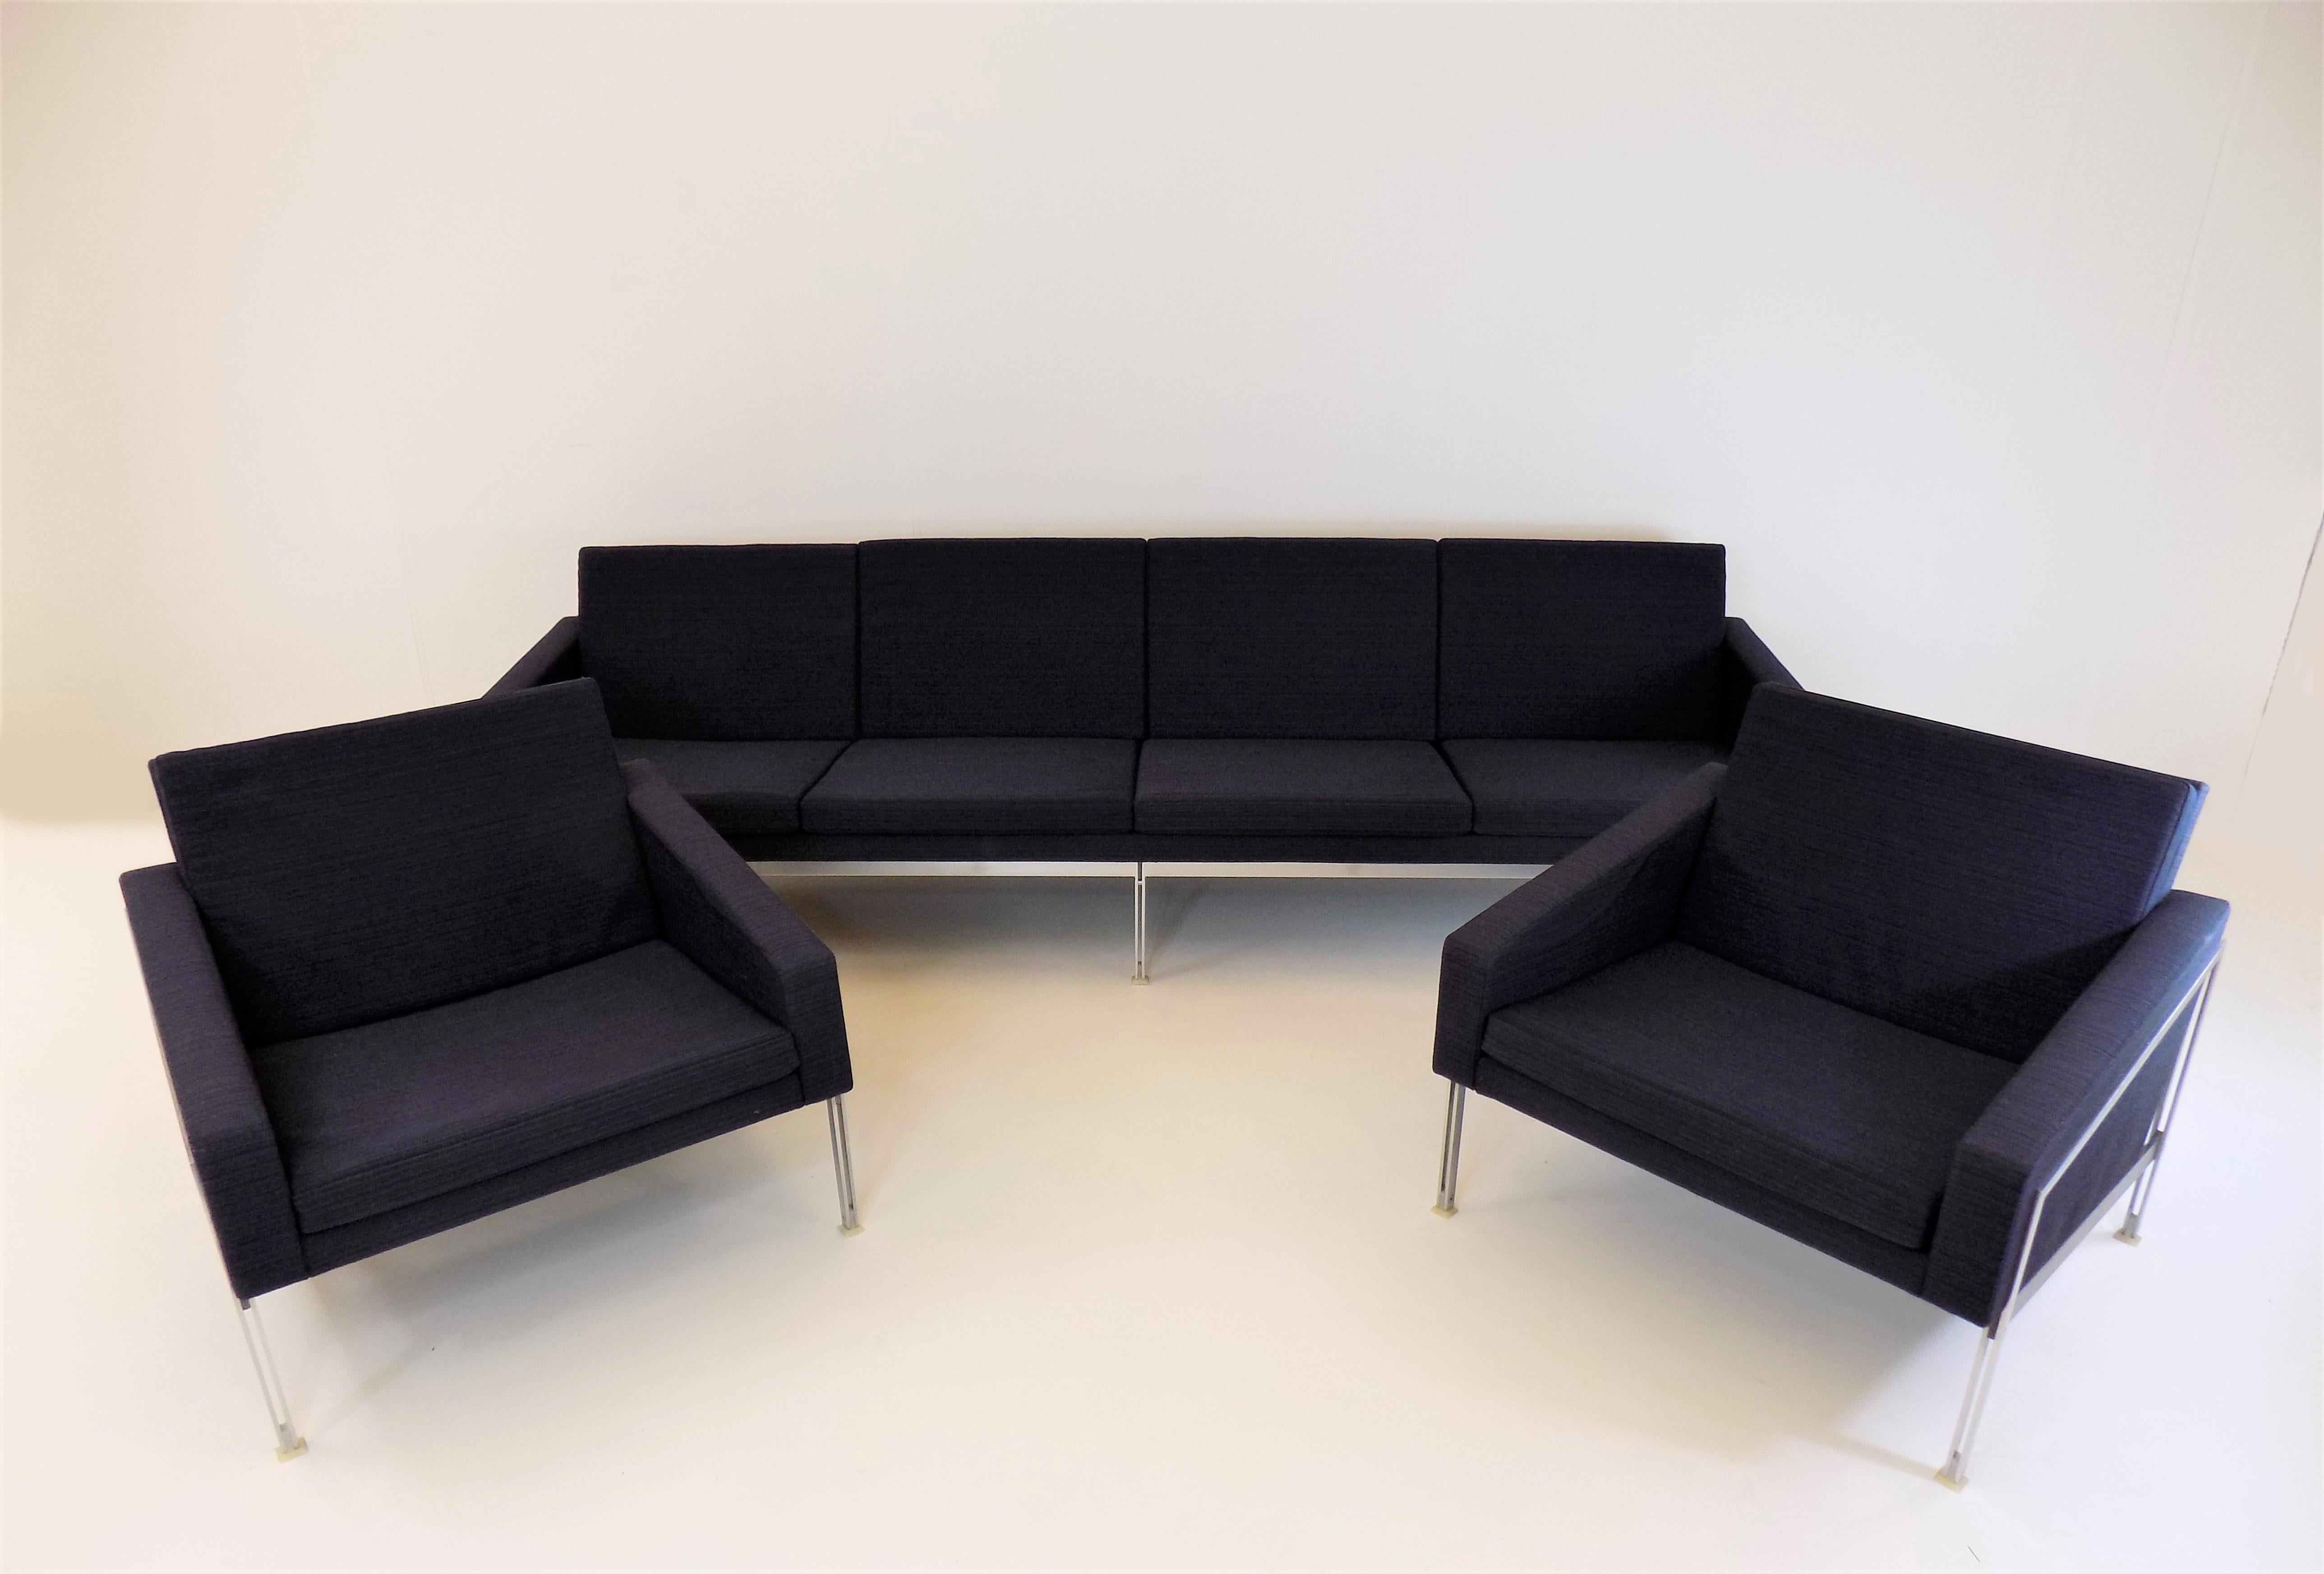 This very high-quality manufactured seating group consists of a 4-seater sofa and 2 armchairs and is in excellent condition. The style of designs by Preben Fabricius & Jørgen Kastholm reminiscent stainless steel frame, as well as the high-quality